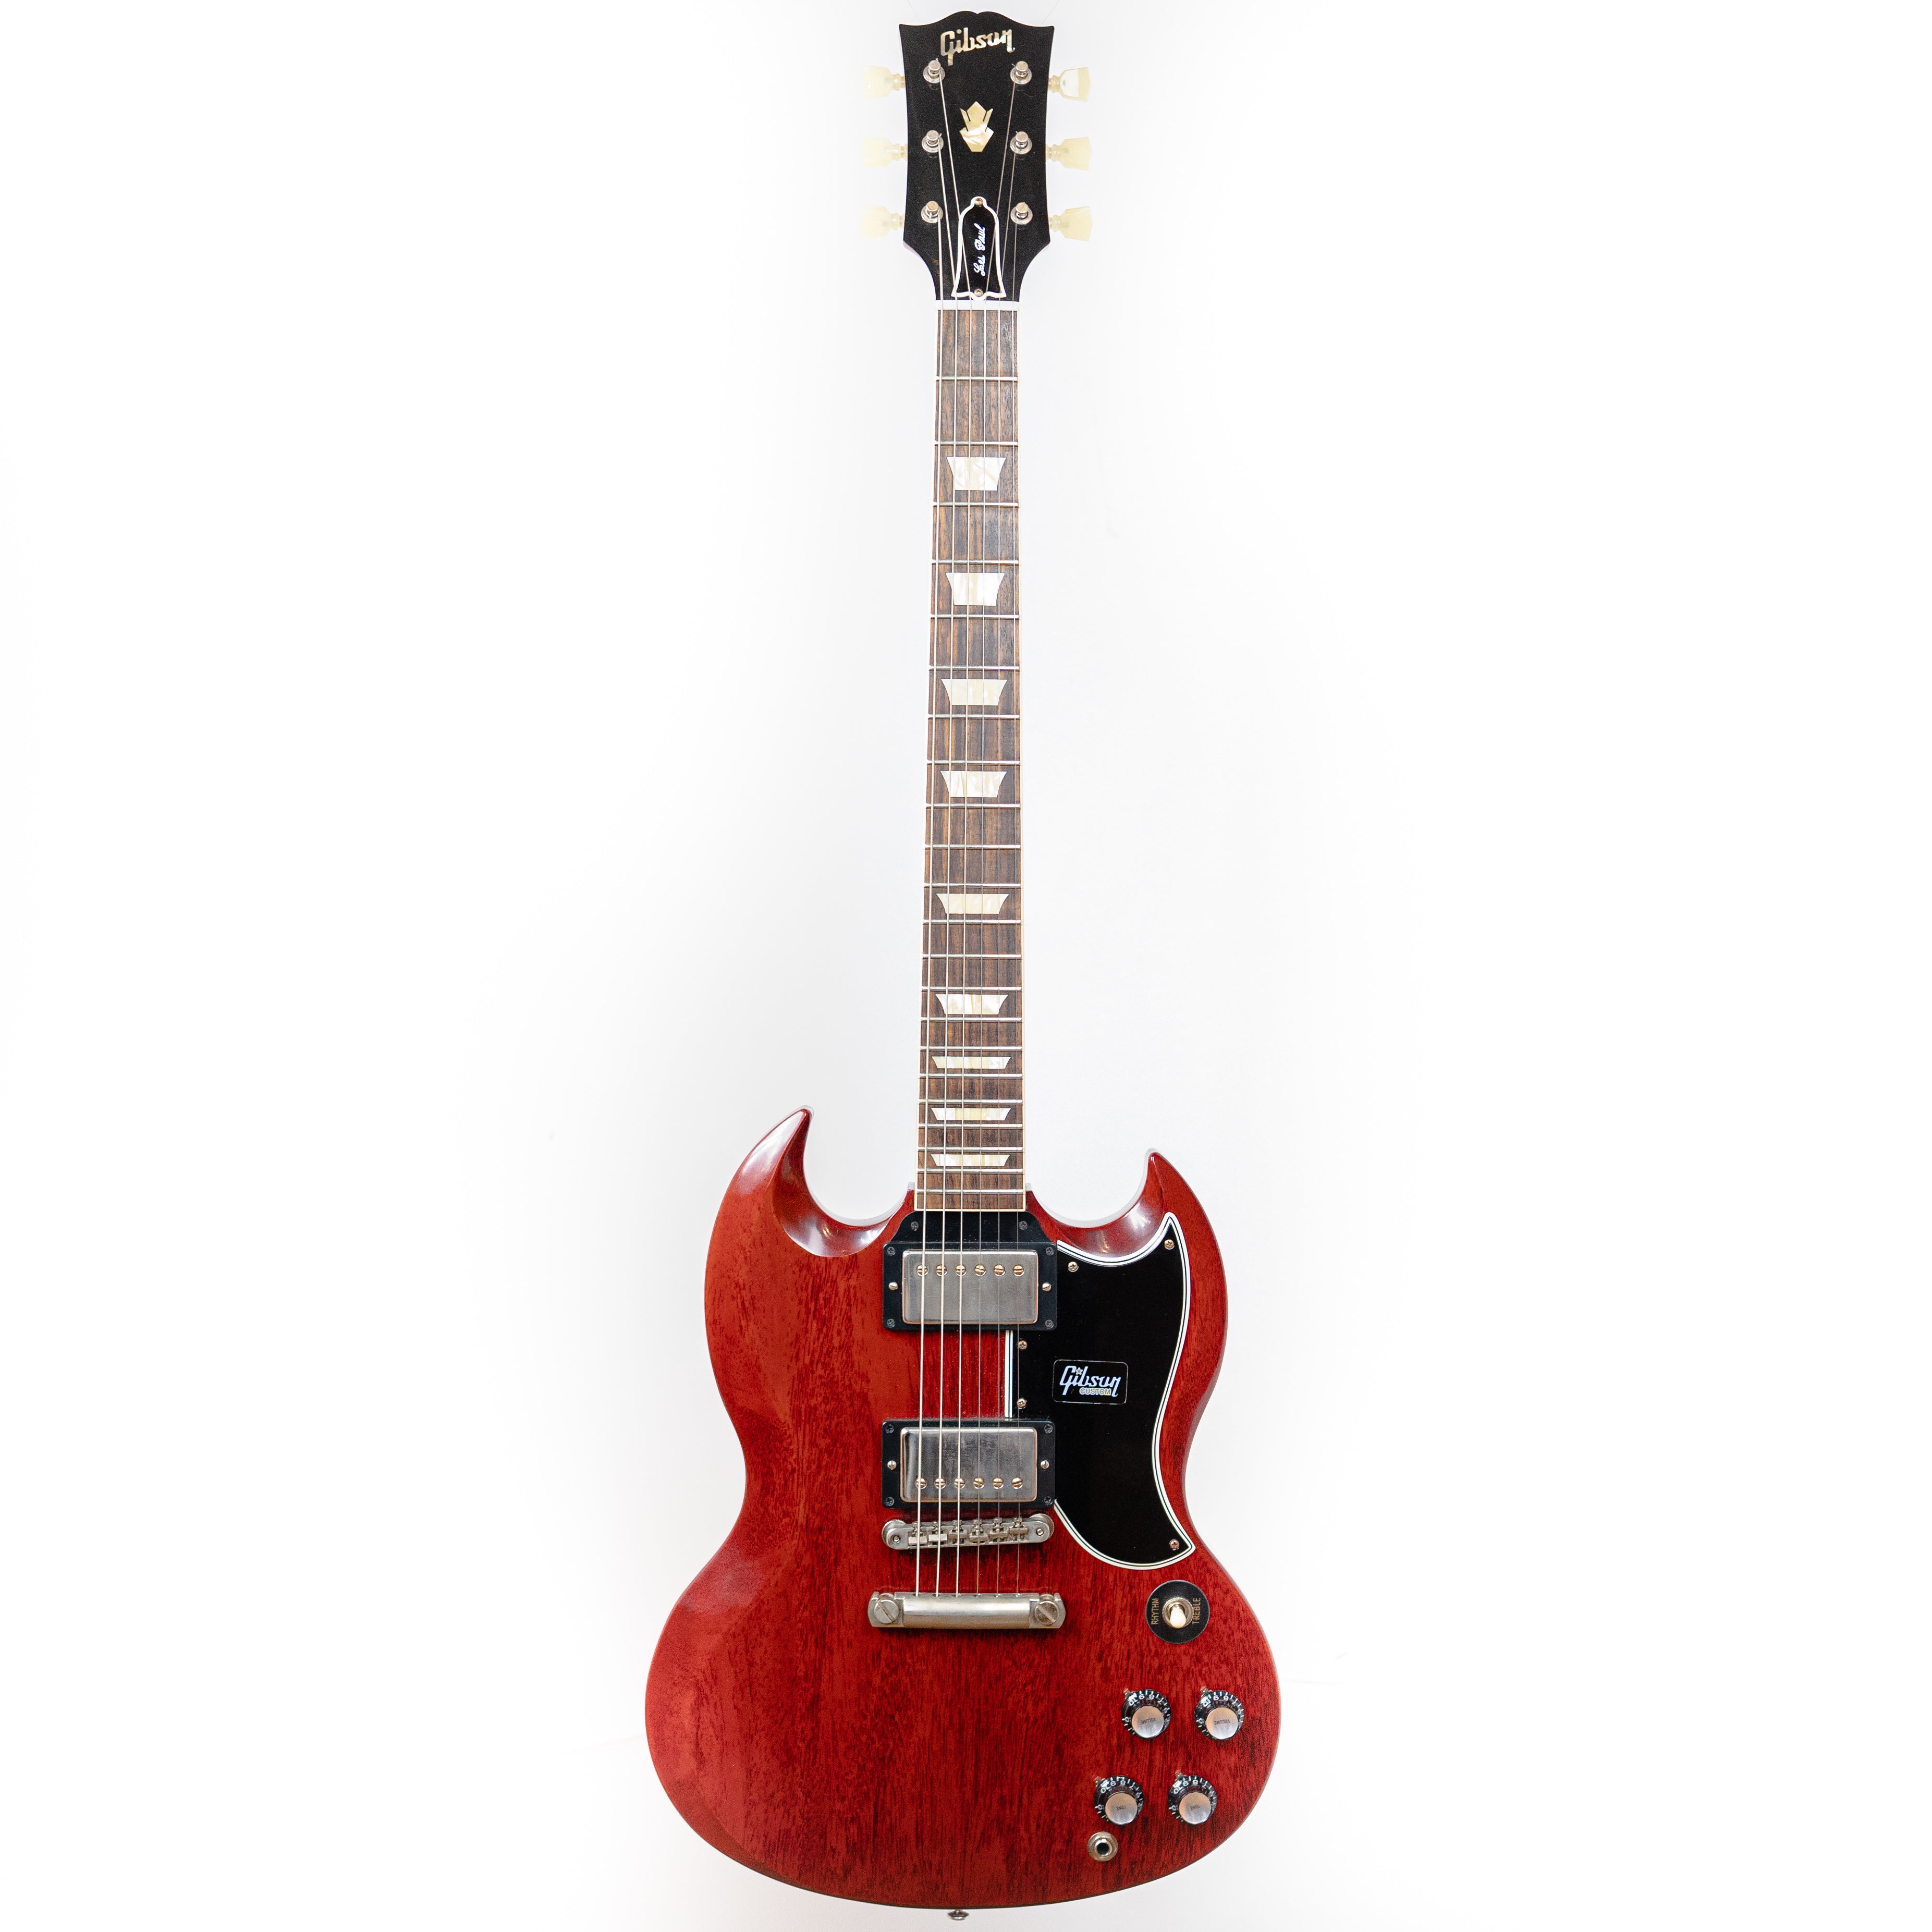 Gibson 1961 Les Paul SG Standard Reissue Stop-Bar VOS Cherry Red